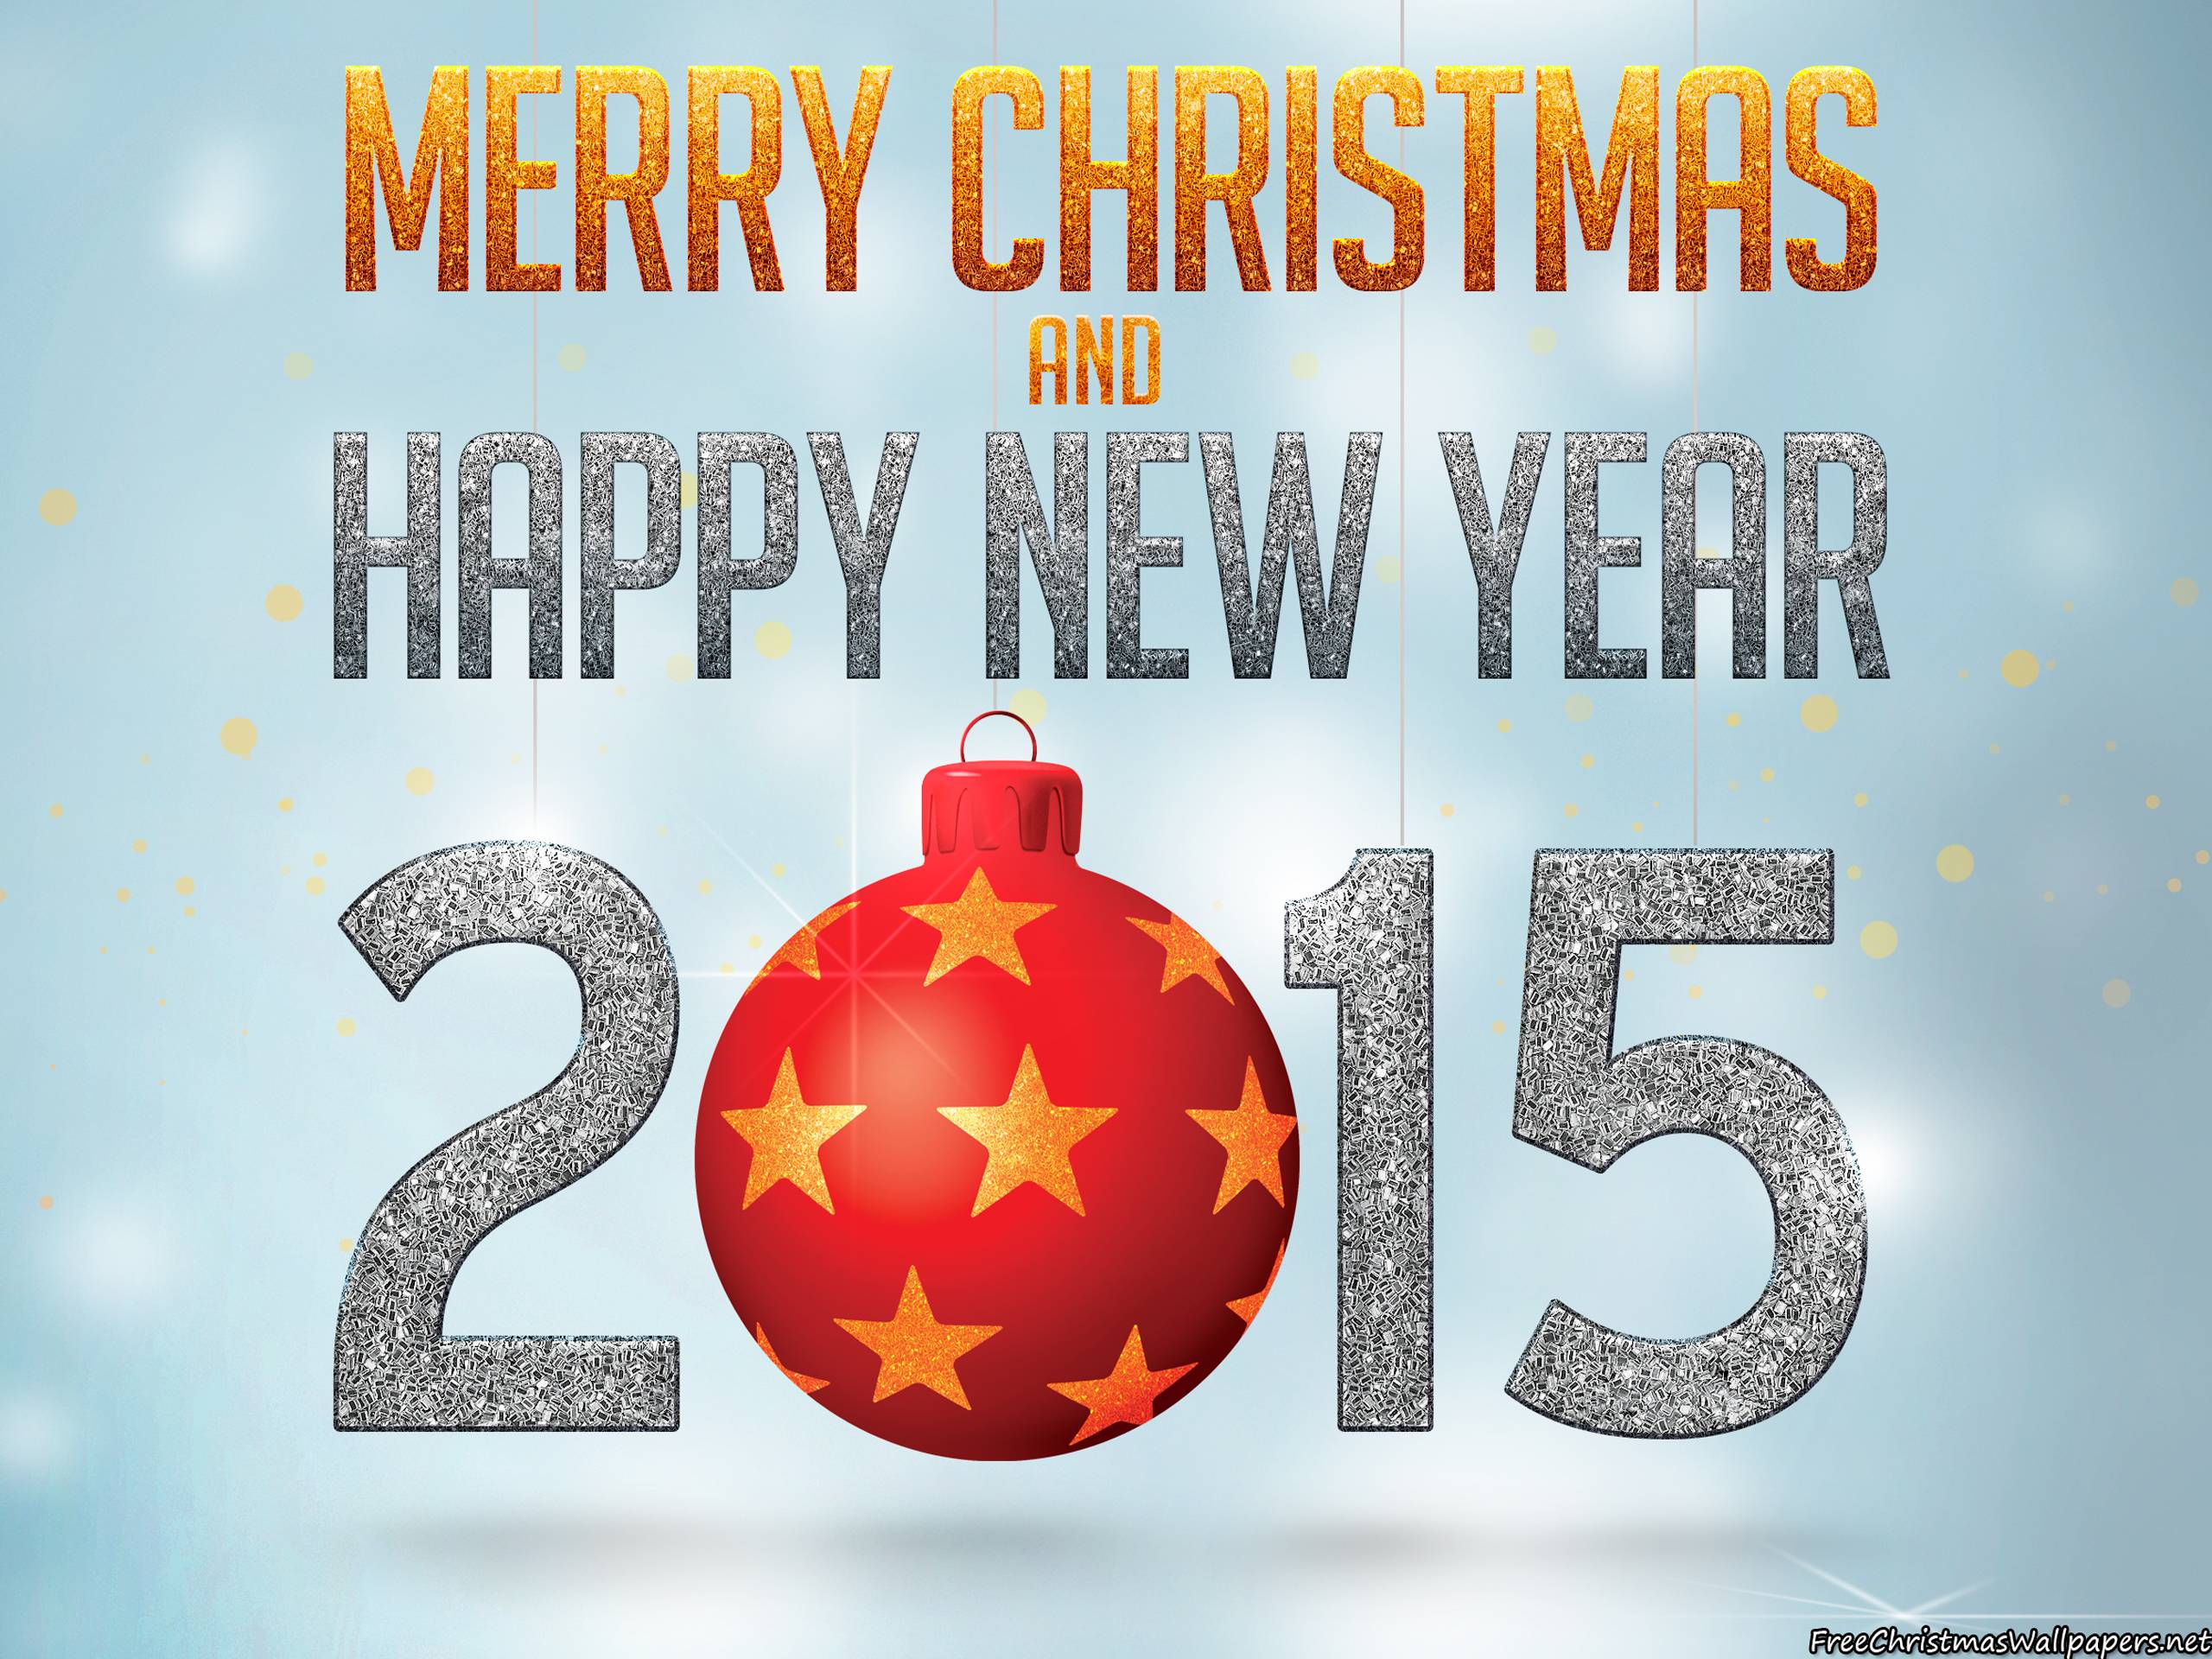 Merry Christmas and Happy New Year 2015 Wallpaper